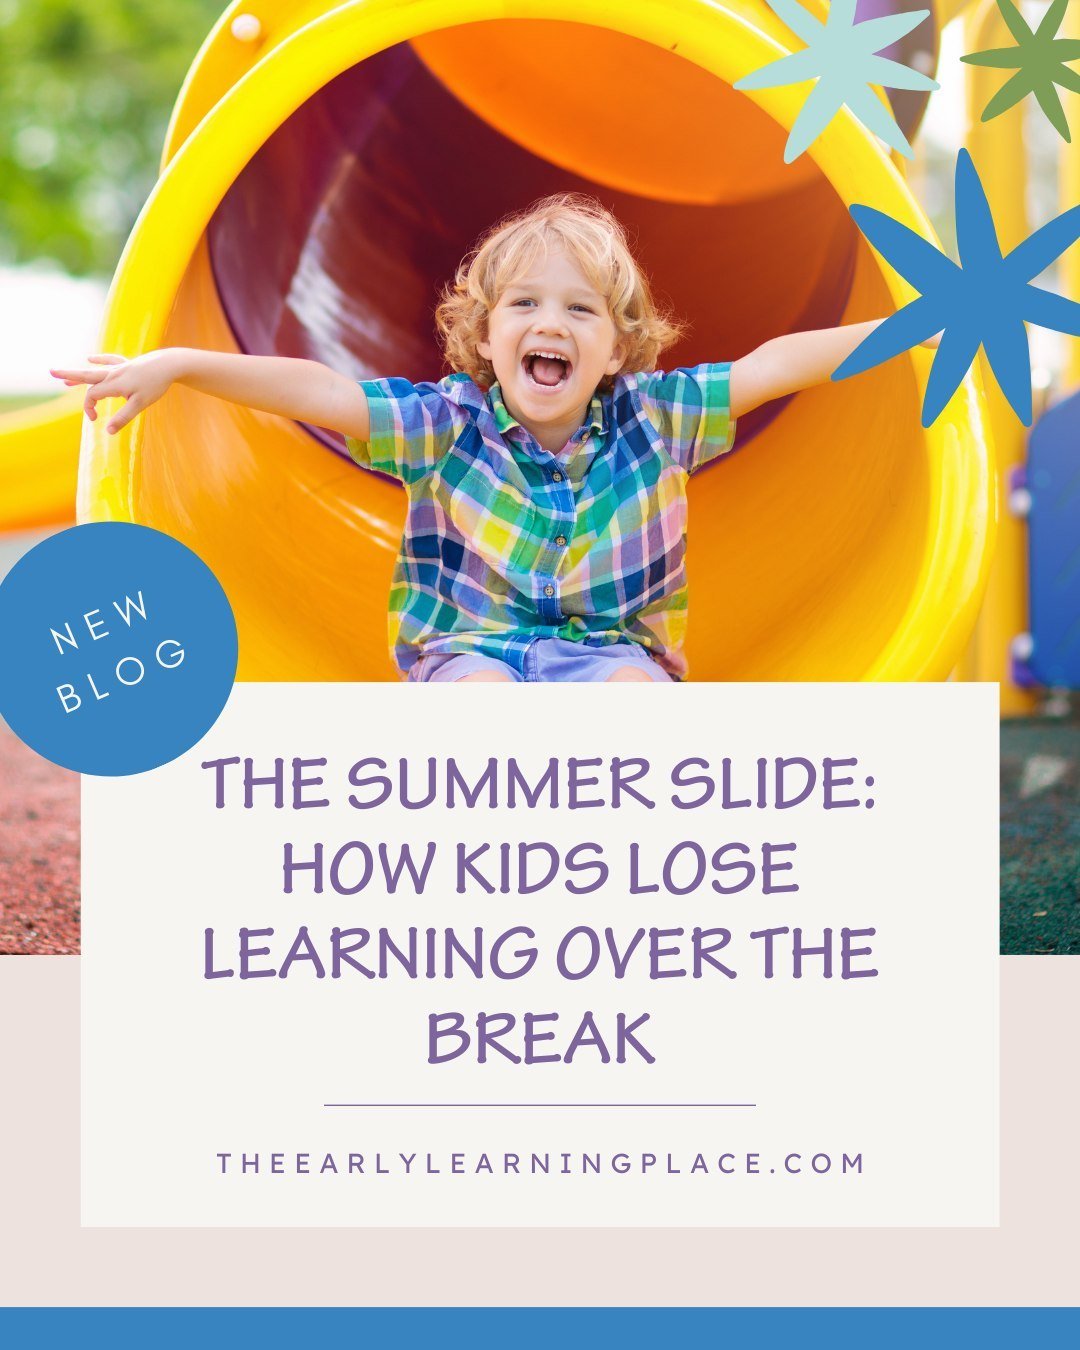 What is the summer slide and how can YOU conquer it?!? ⁠
⁠
Comment SUMMER for the link! 😎⁠
⁠
⁠
⁠
#theearlylearningplace #learningblog #newblog  #literacyblog #summerslide #summerlearning #summerbreak #parentingtips #parenttips #teachertips ⁠
#homesc